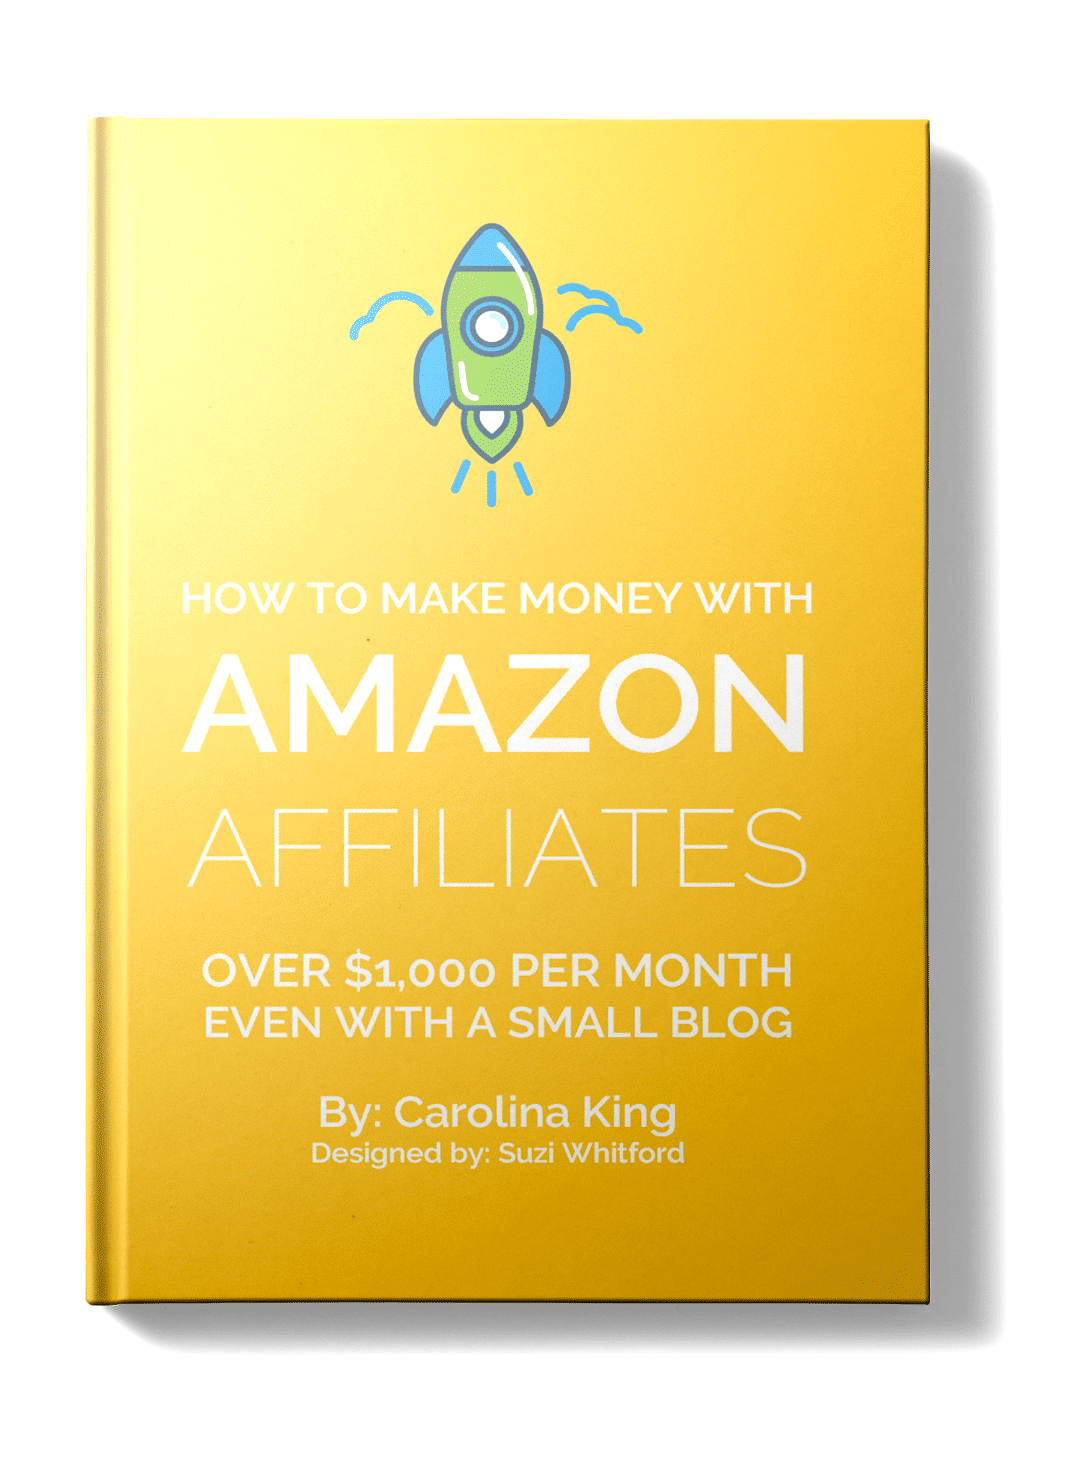 Find out how to make money with Amazon affiliates even with a small blog